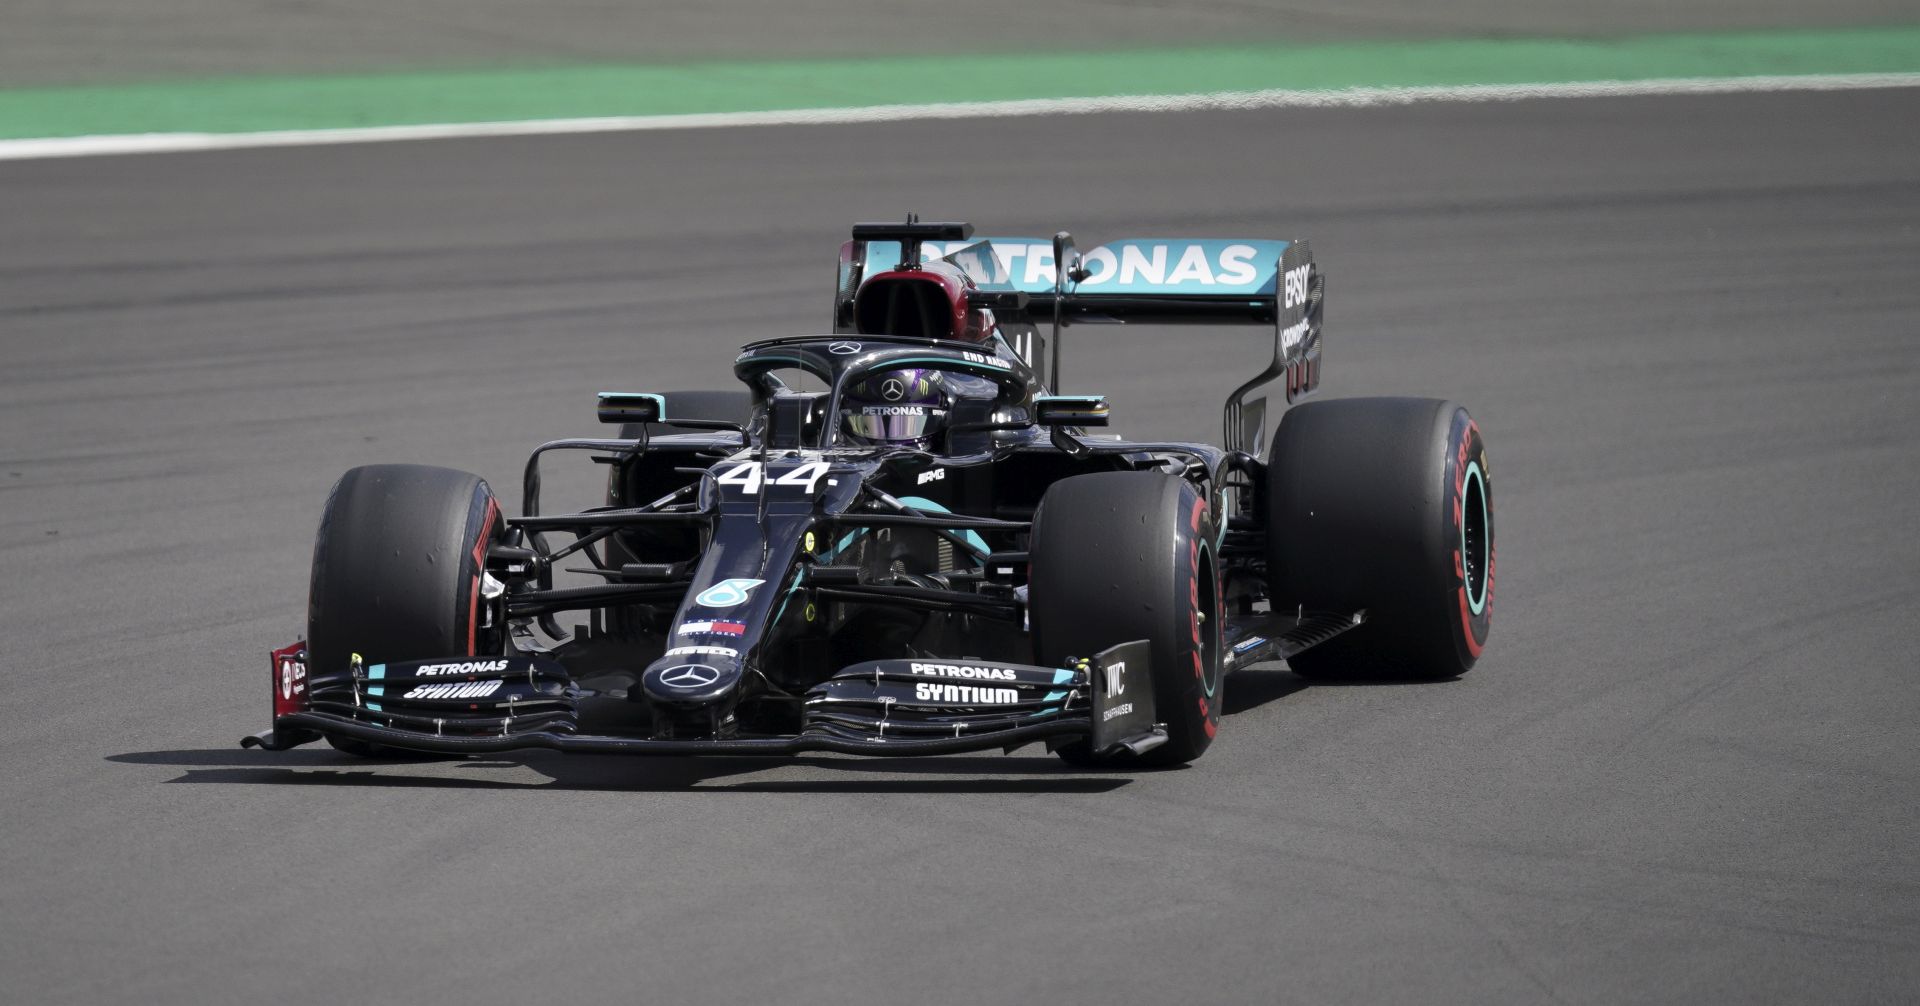 epa08578432 British Formula One driver Lewis Hamilton of Mercedes-AMG Petronas in action during the third practice session of the British Formula One Grand Prix in Silverstone, Britain, 01 August 2020.  EPA/Will Oliver / Pool